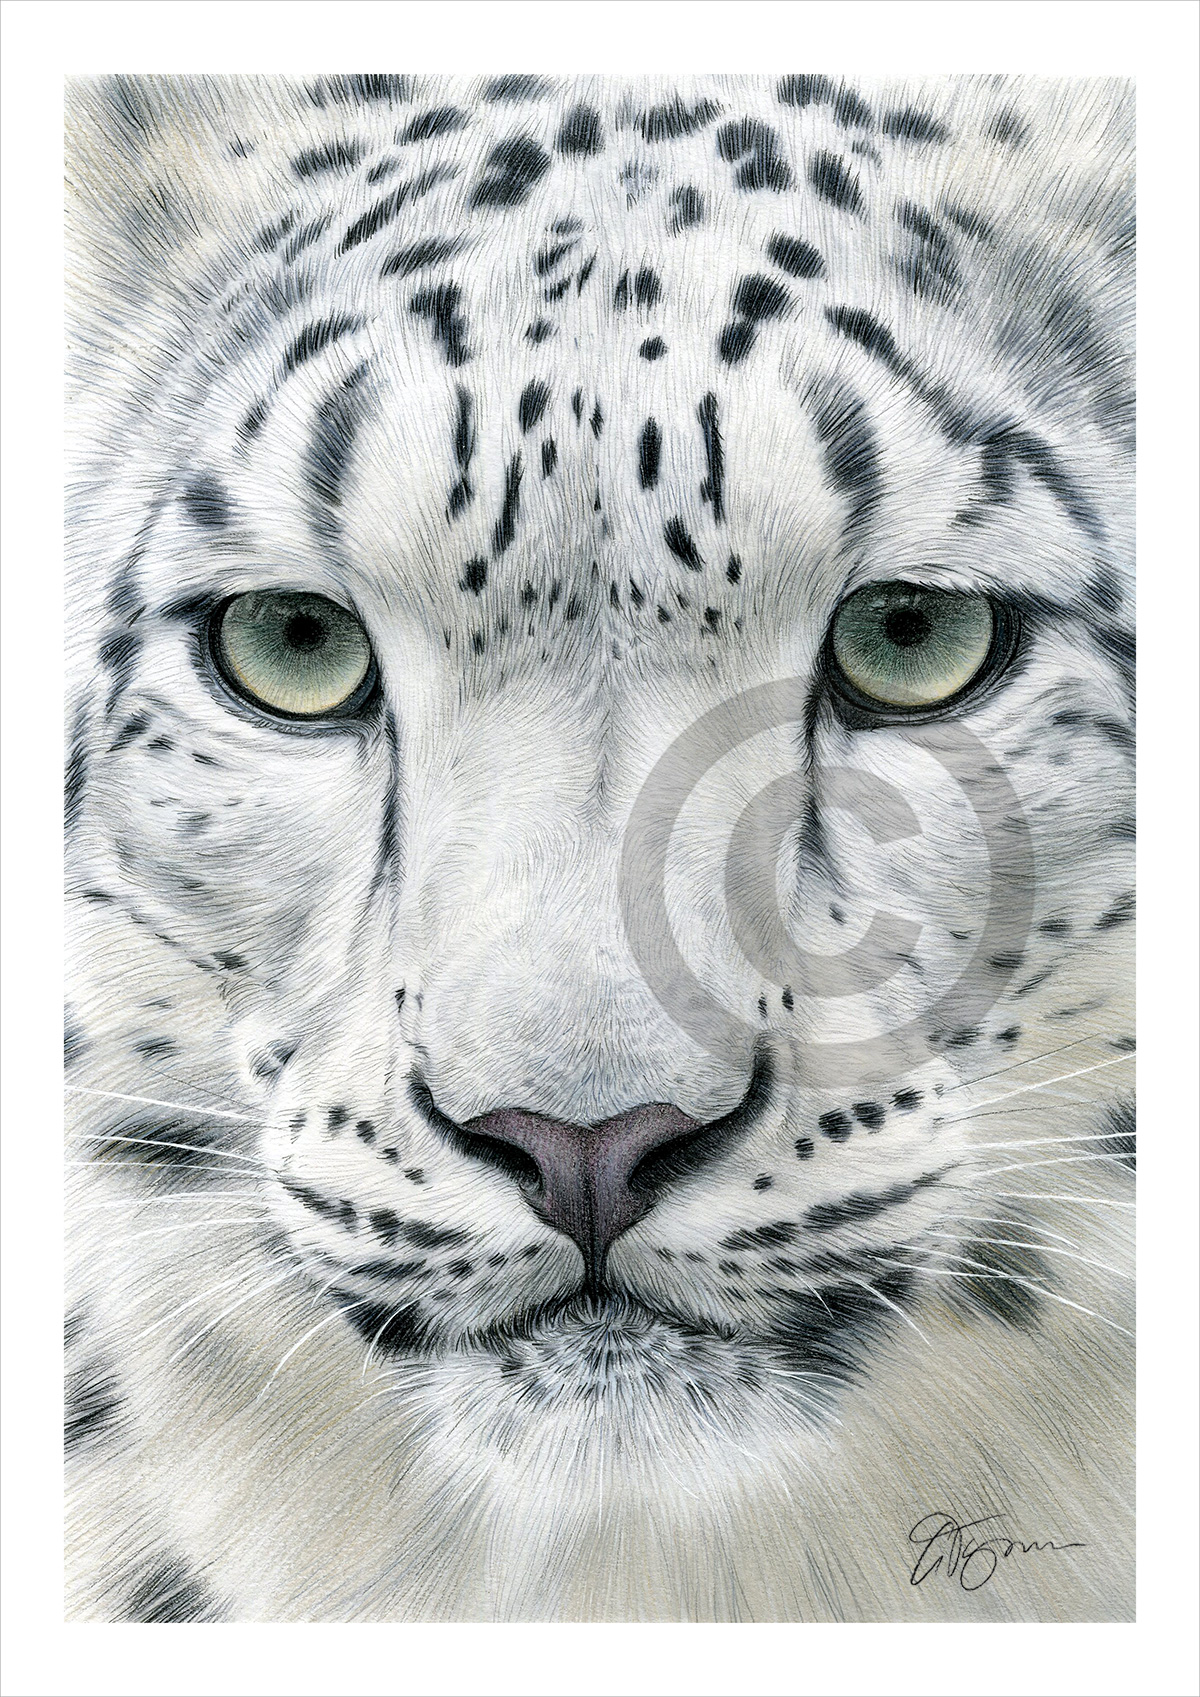 Colour pencil drawing of a snow leopard's face by artist Gary Tymon